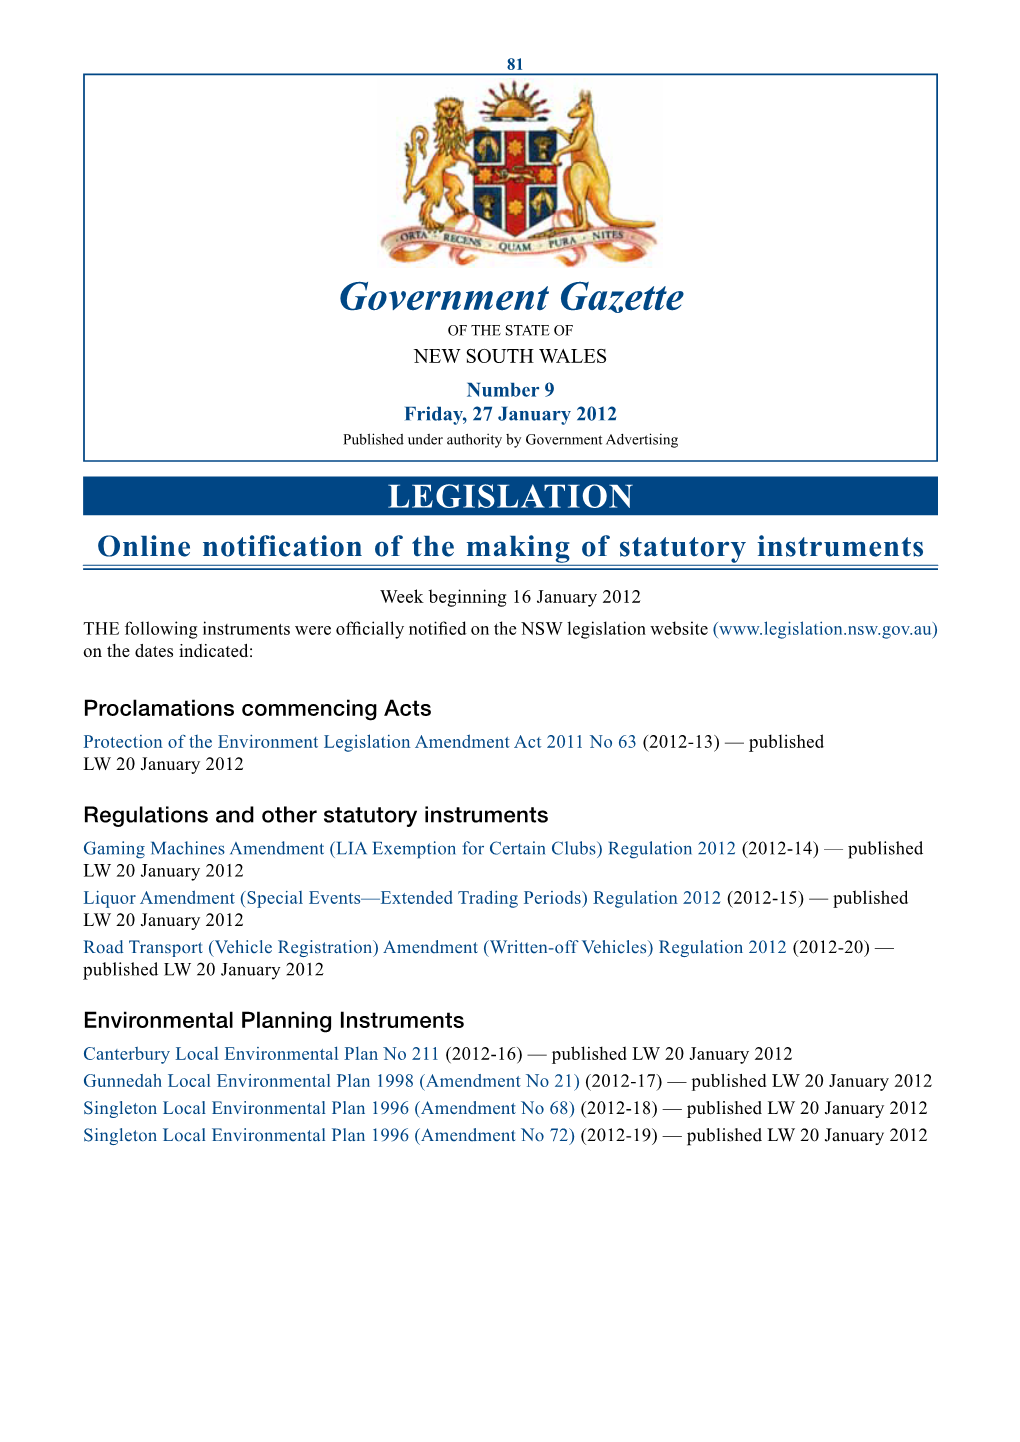 Government Gazette of the STATE of NEW SOUTH WALES Number 9 Friday, 27 January 2012 Published Under Authority by Government Advertising